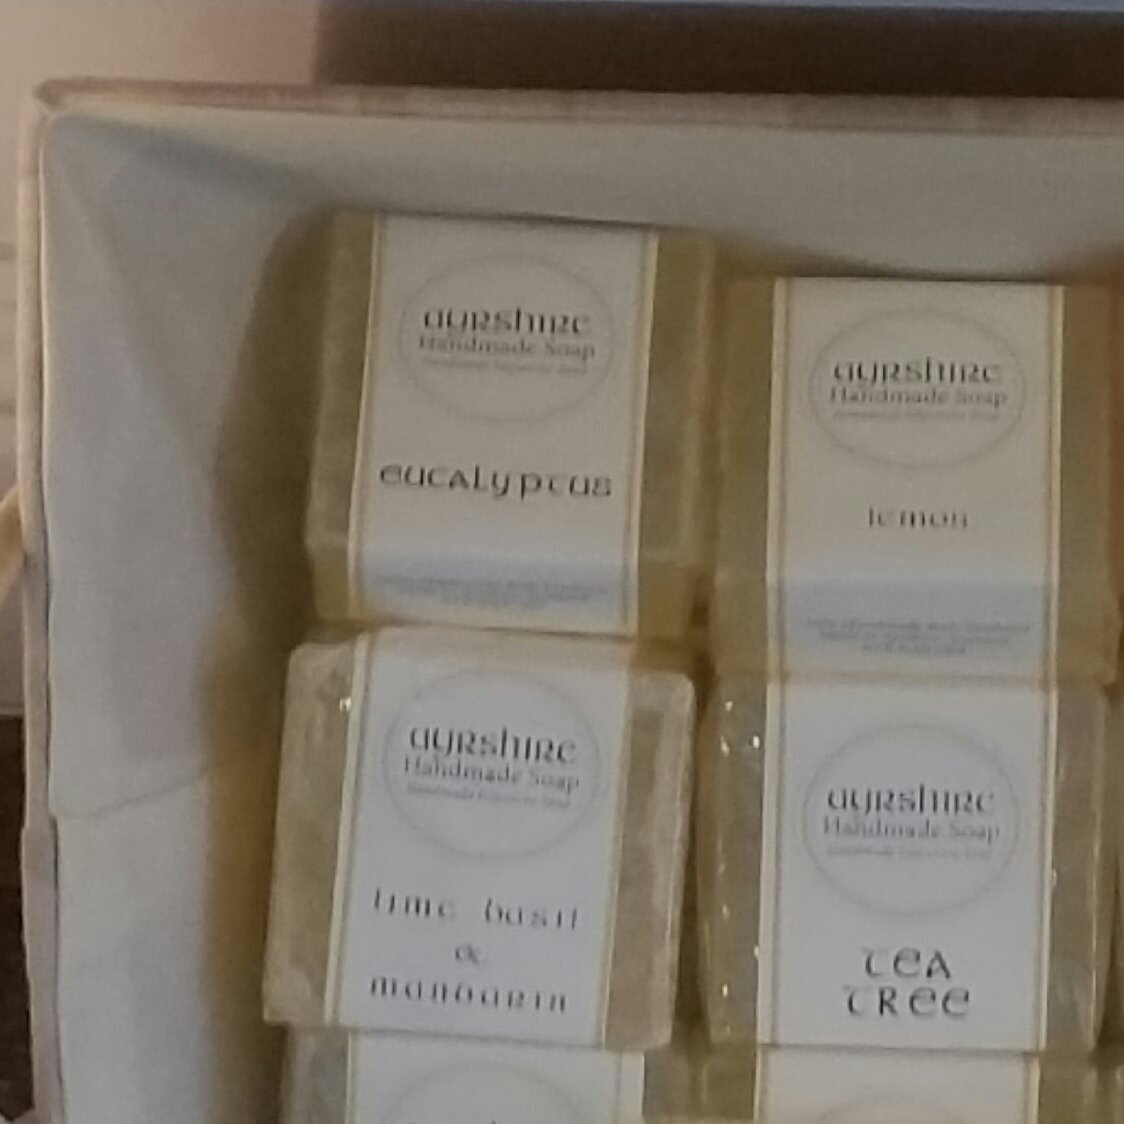 Images Old School Soaps & Candles By AYRSHIRE HANDMADE SOAP LIMITED